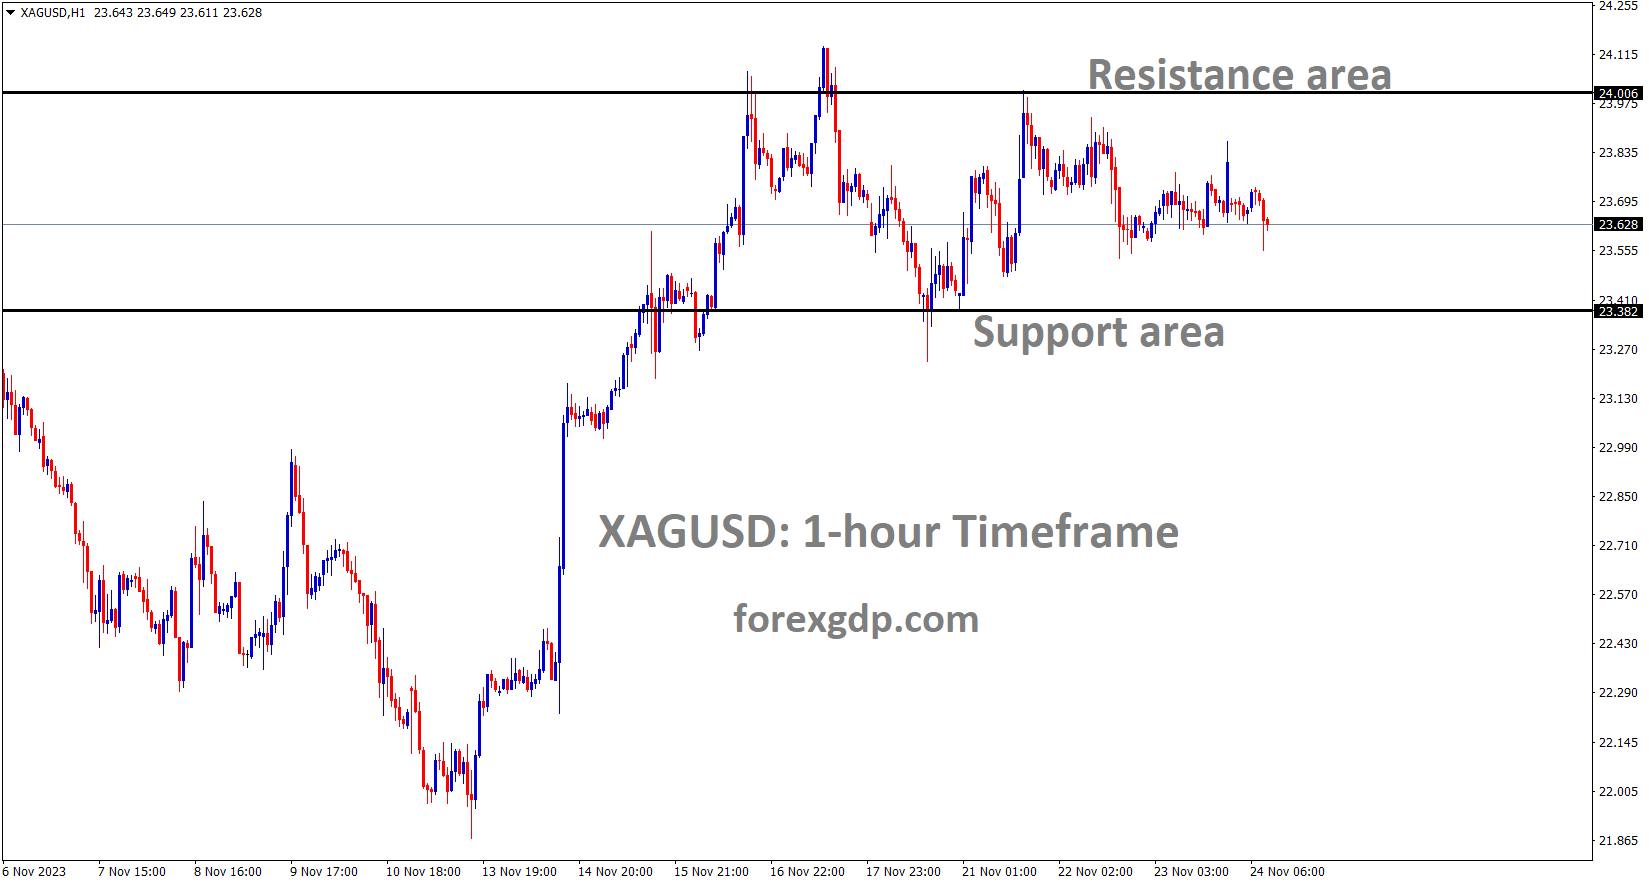 XAGUSD Silver price is moving in the Box pattern and the market has fallen from the resistance area of the pattern